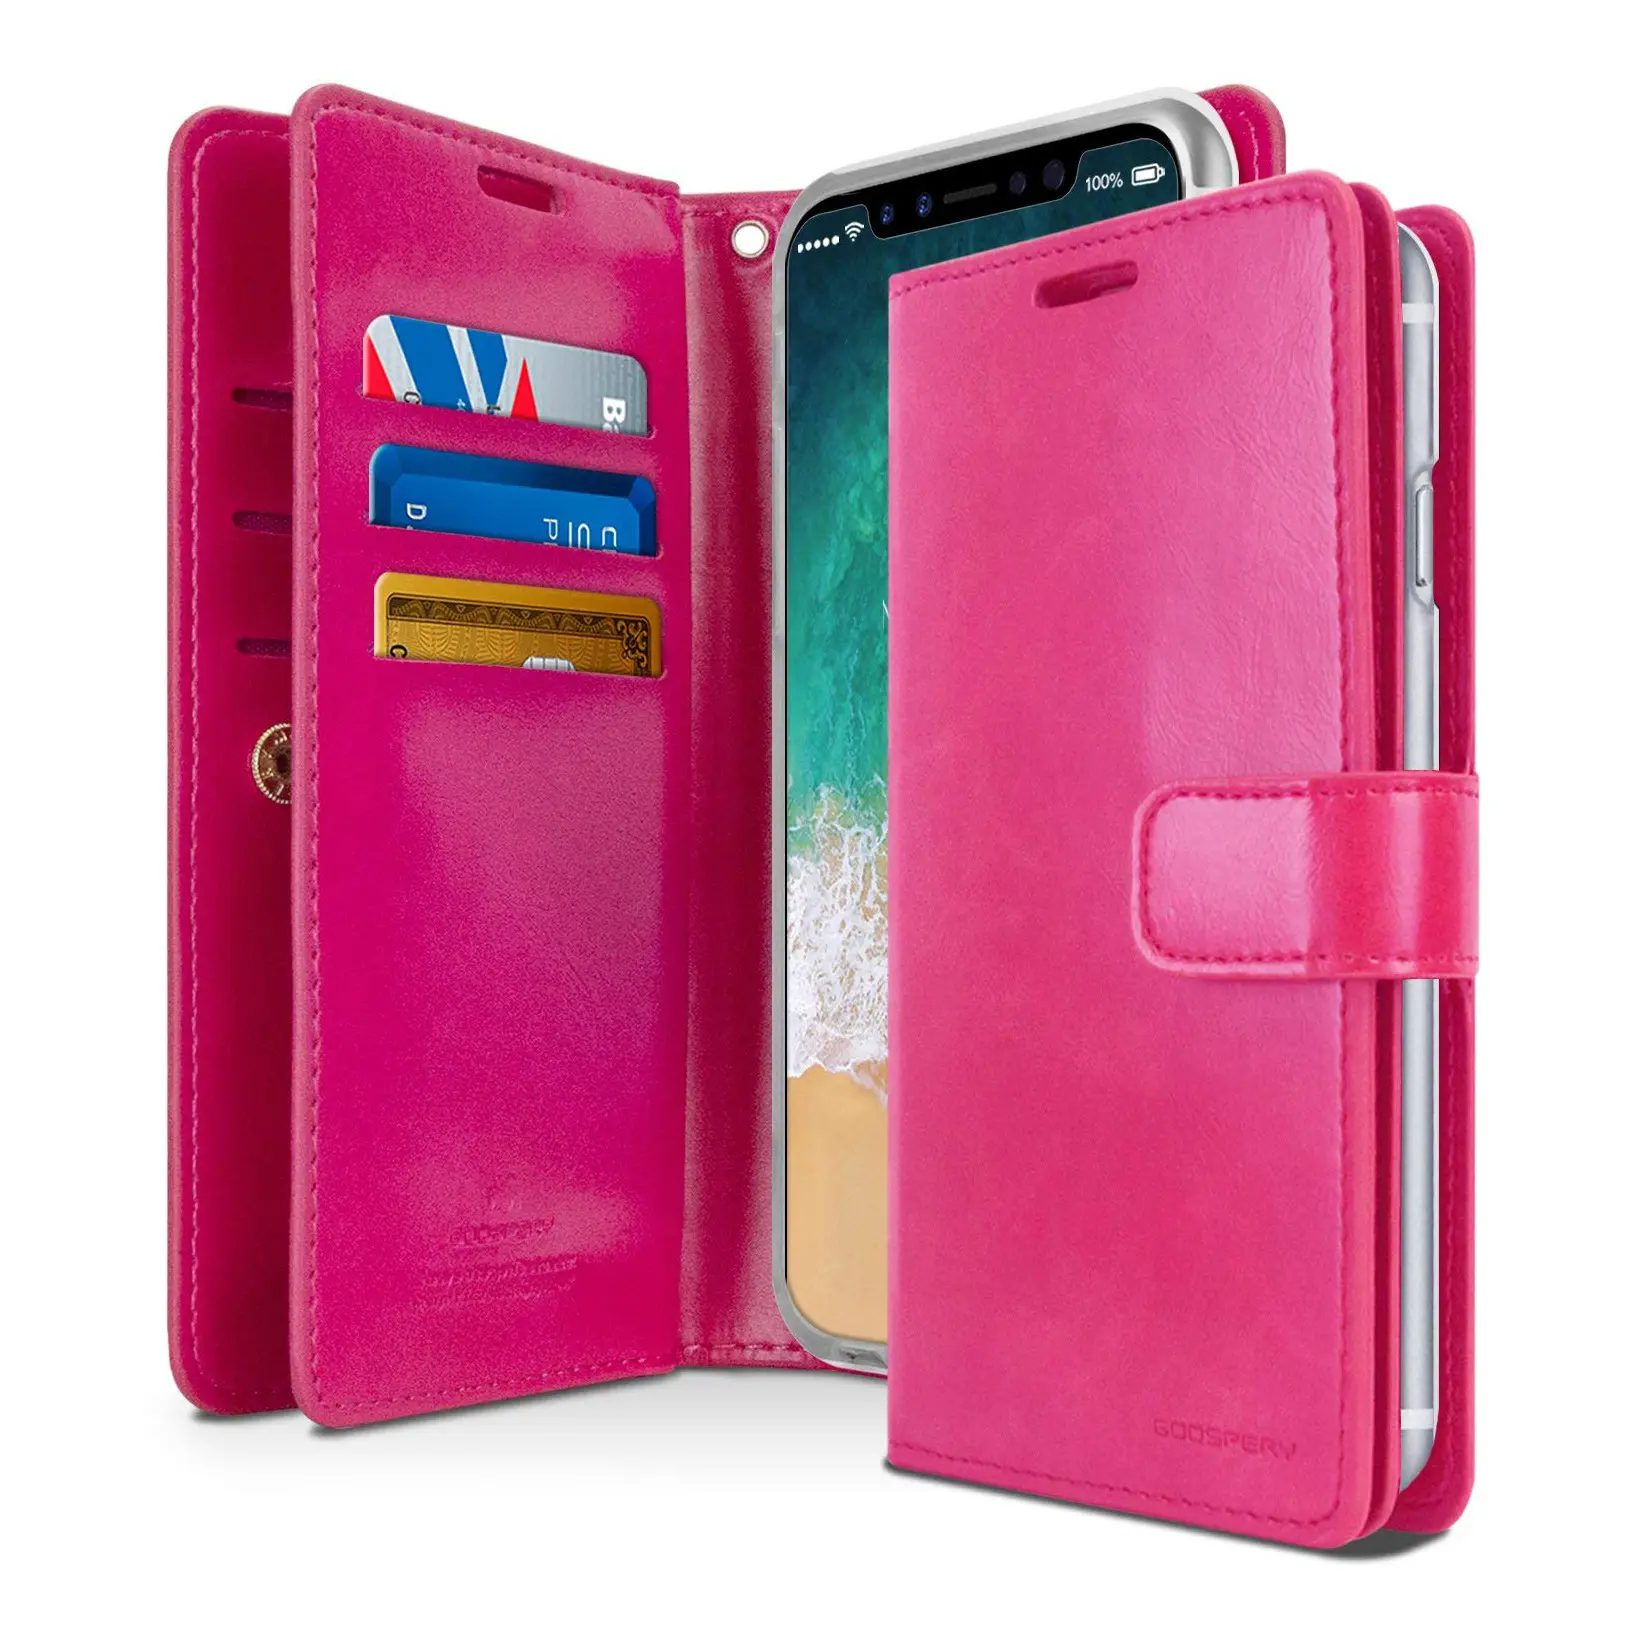 Mix Color Cell Phone Accessories Wallet Mobile Phone Case Covers Flip TPU PU Leather Wallet Case For iPhone 4s 5/SE 5C